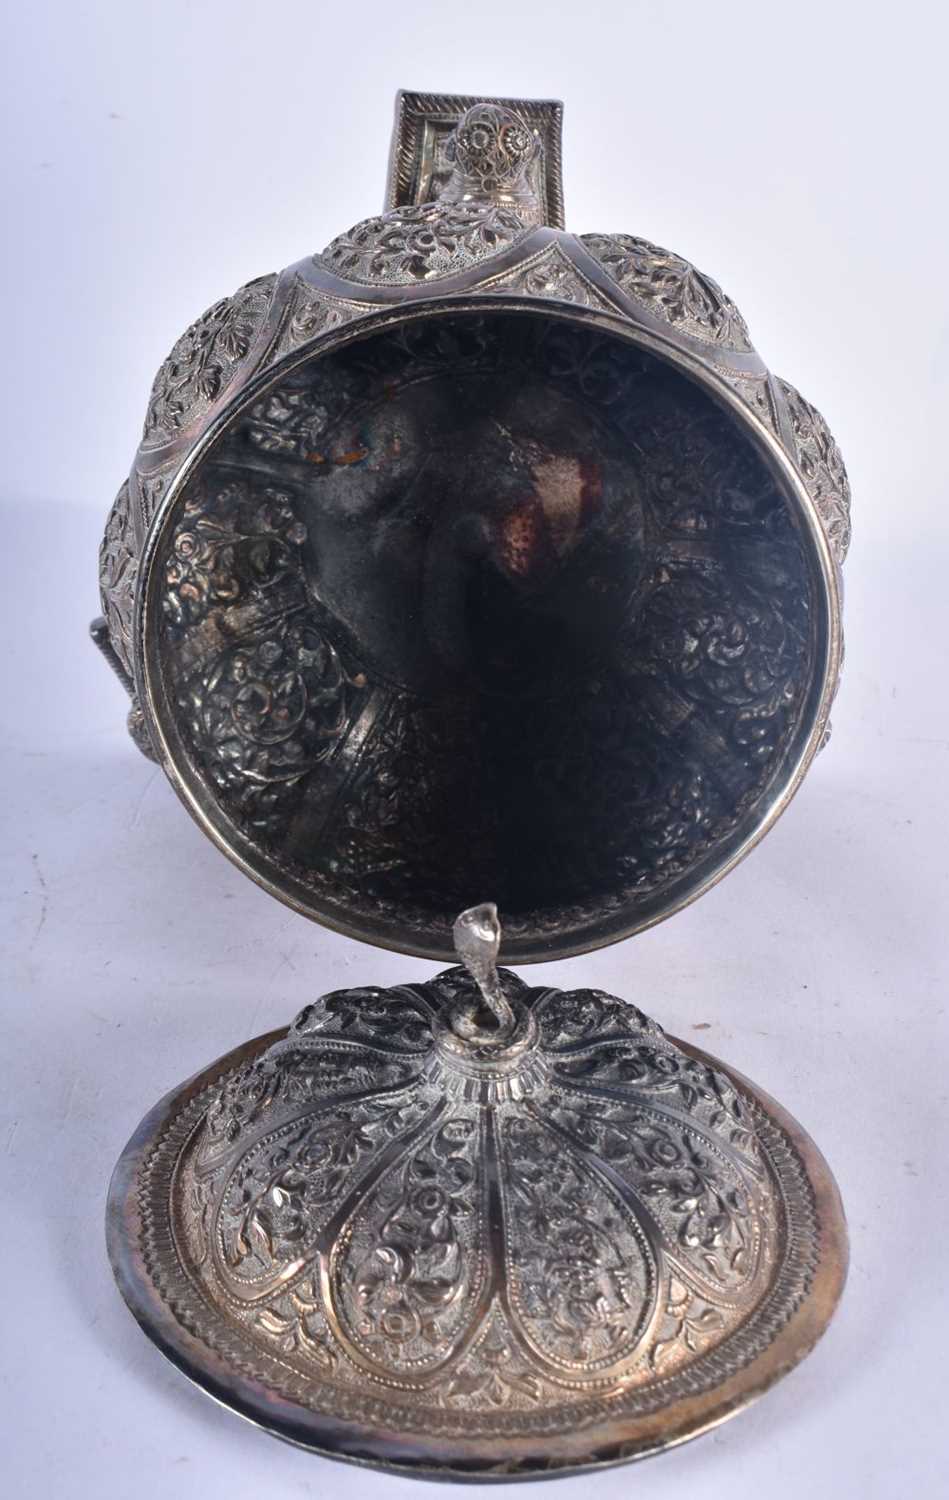 A LOVELY ANTIQUE INDIAN SILVER REPOUSSE ELEPHANT BOWL AND COVER. 953 grams. 18cm x 17 cm. - Image 2 of 3